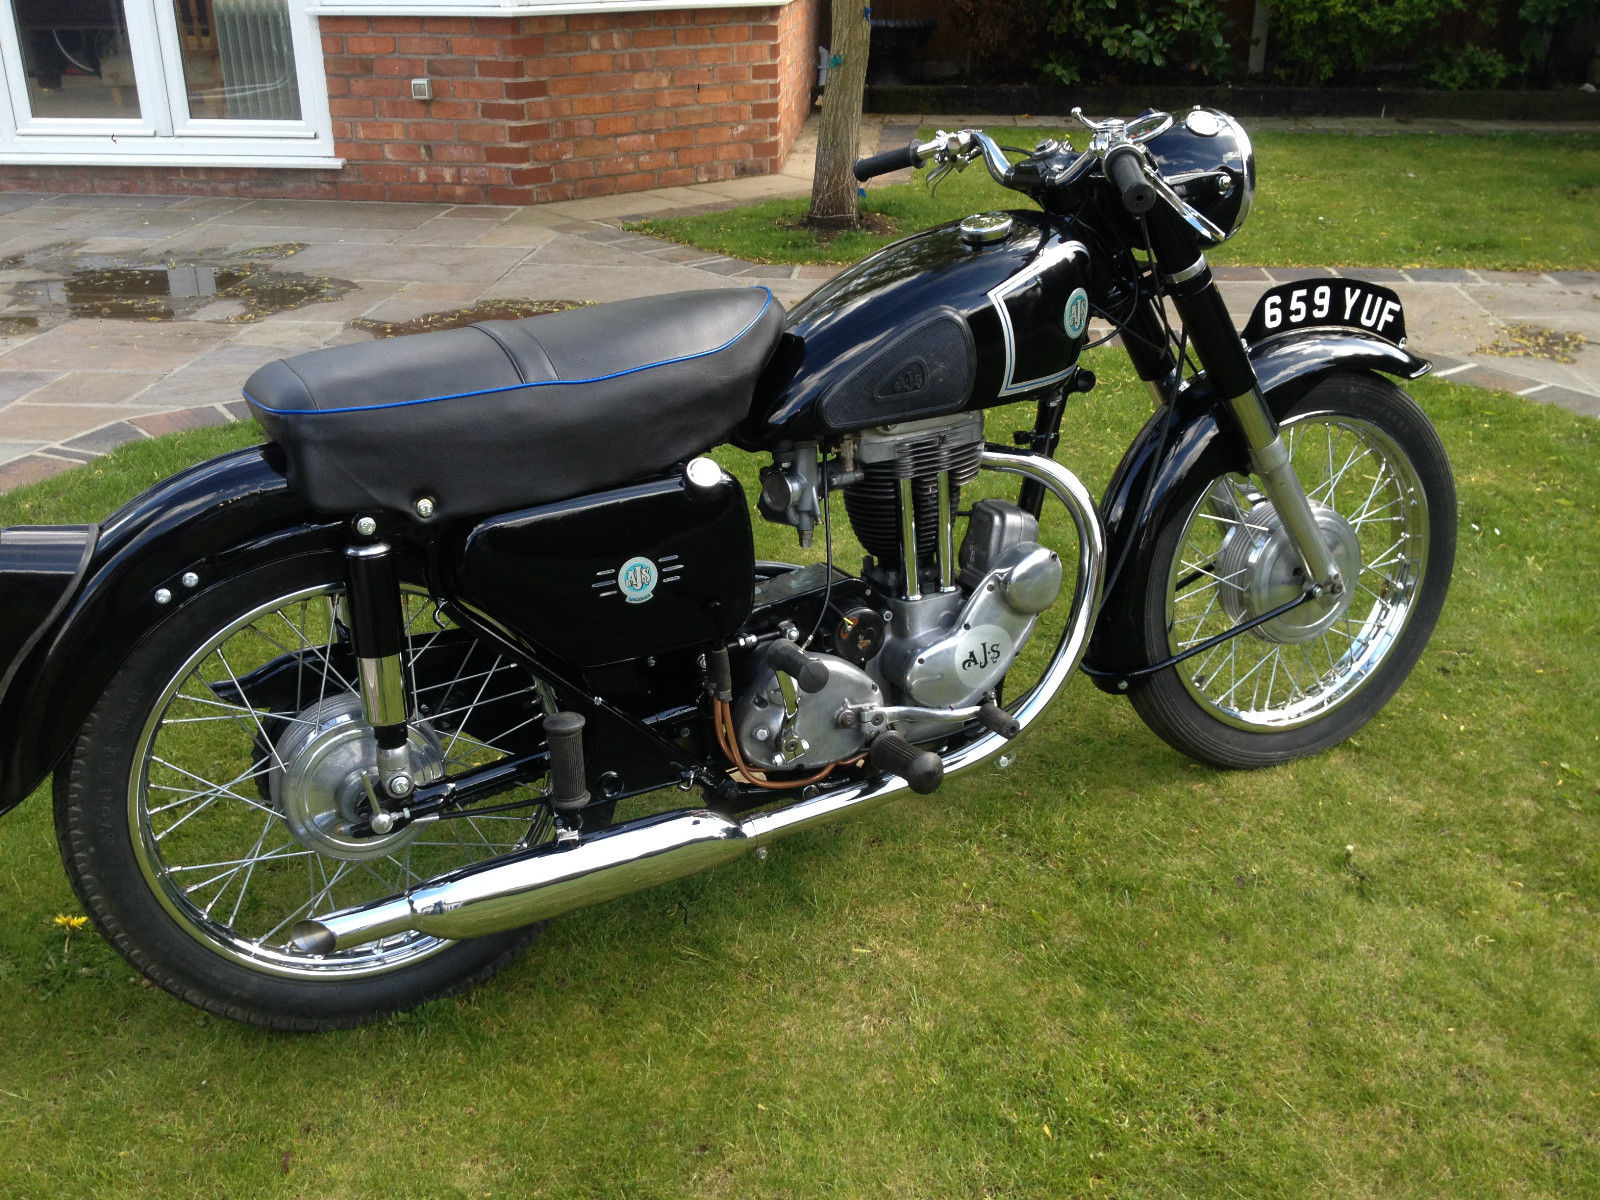 AJS 16MS - 1957 - Fuel Tank, Saddle, Front Mudguard and Rear Suspension.